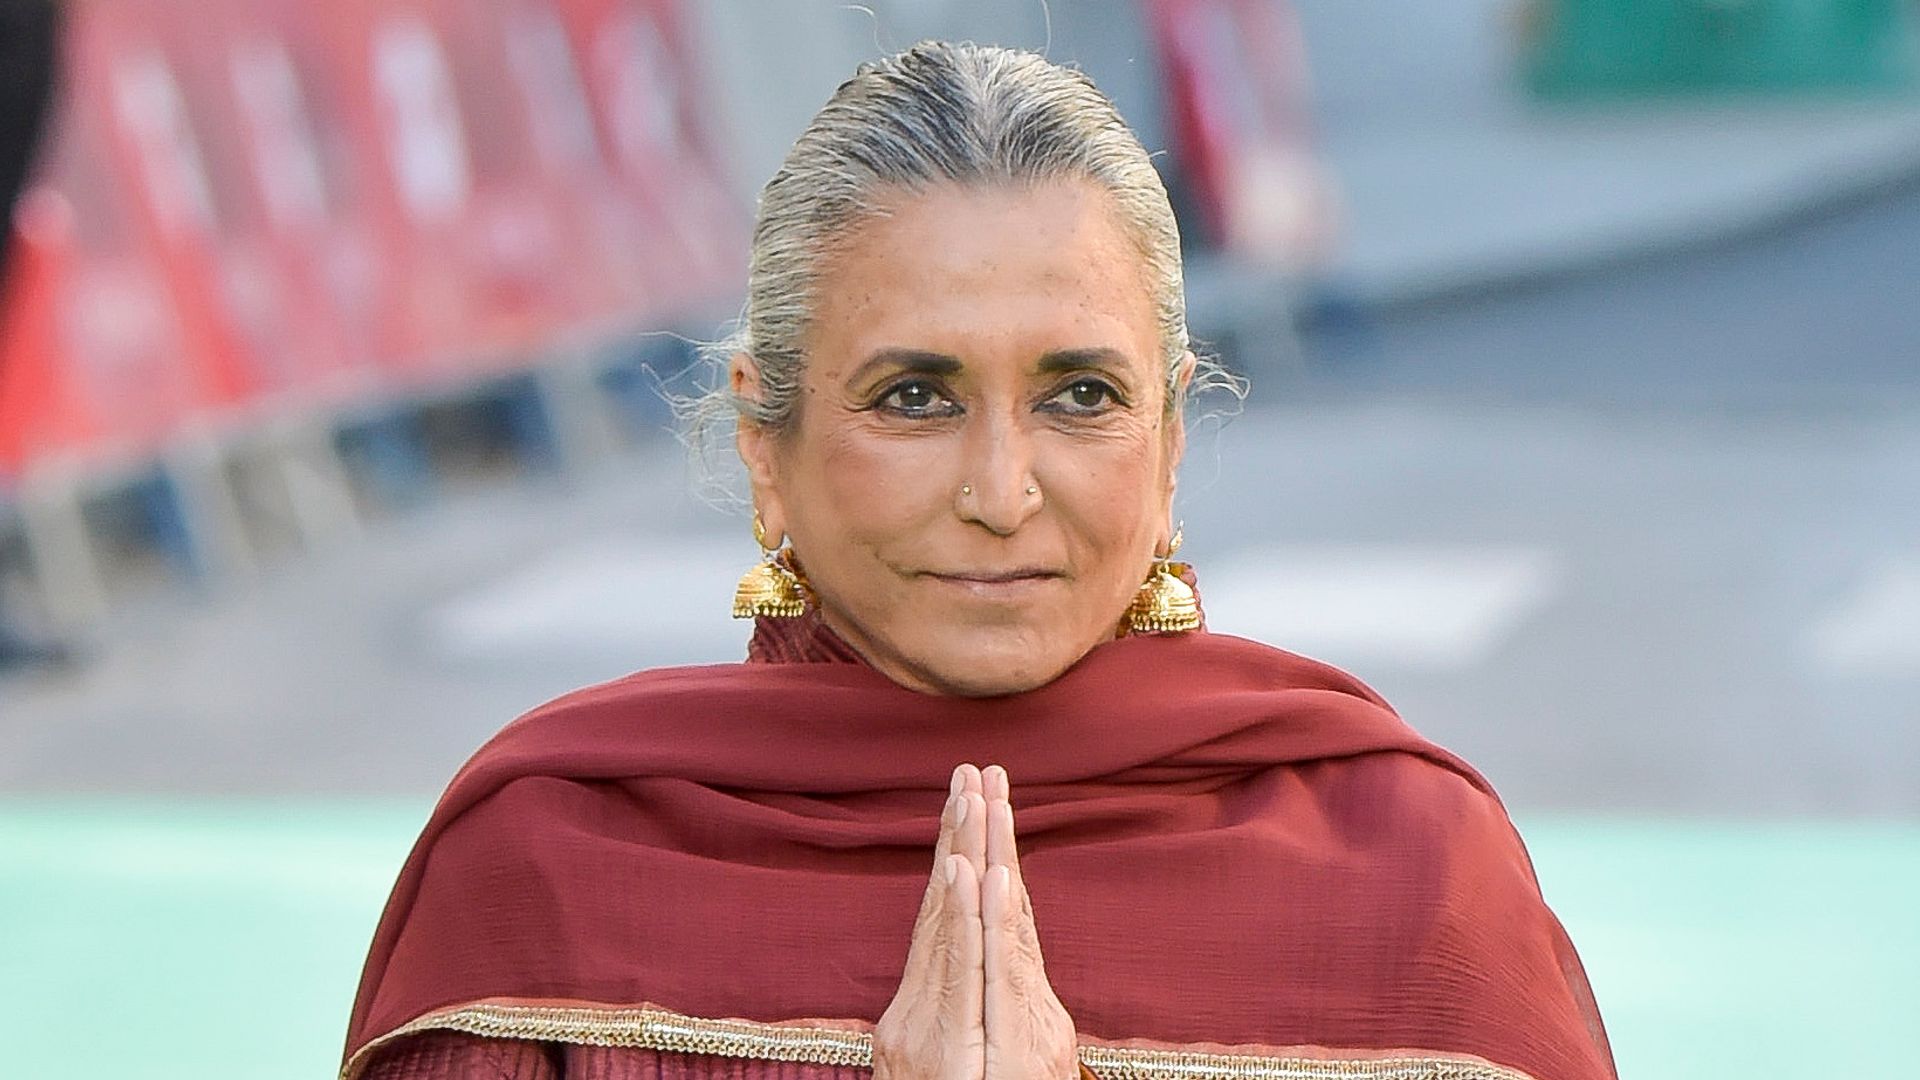 Deepa Mehta attends the 'Libertad' premiere during the 66th SEMINCI-Valladolid International Film Festival on October 23, 2021 in Valladolid, Spain.